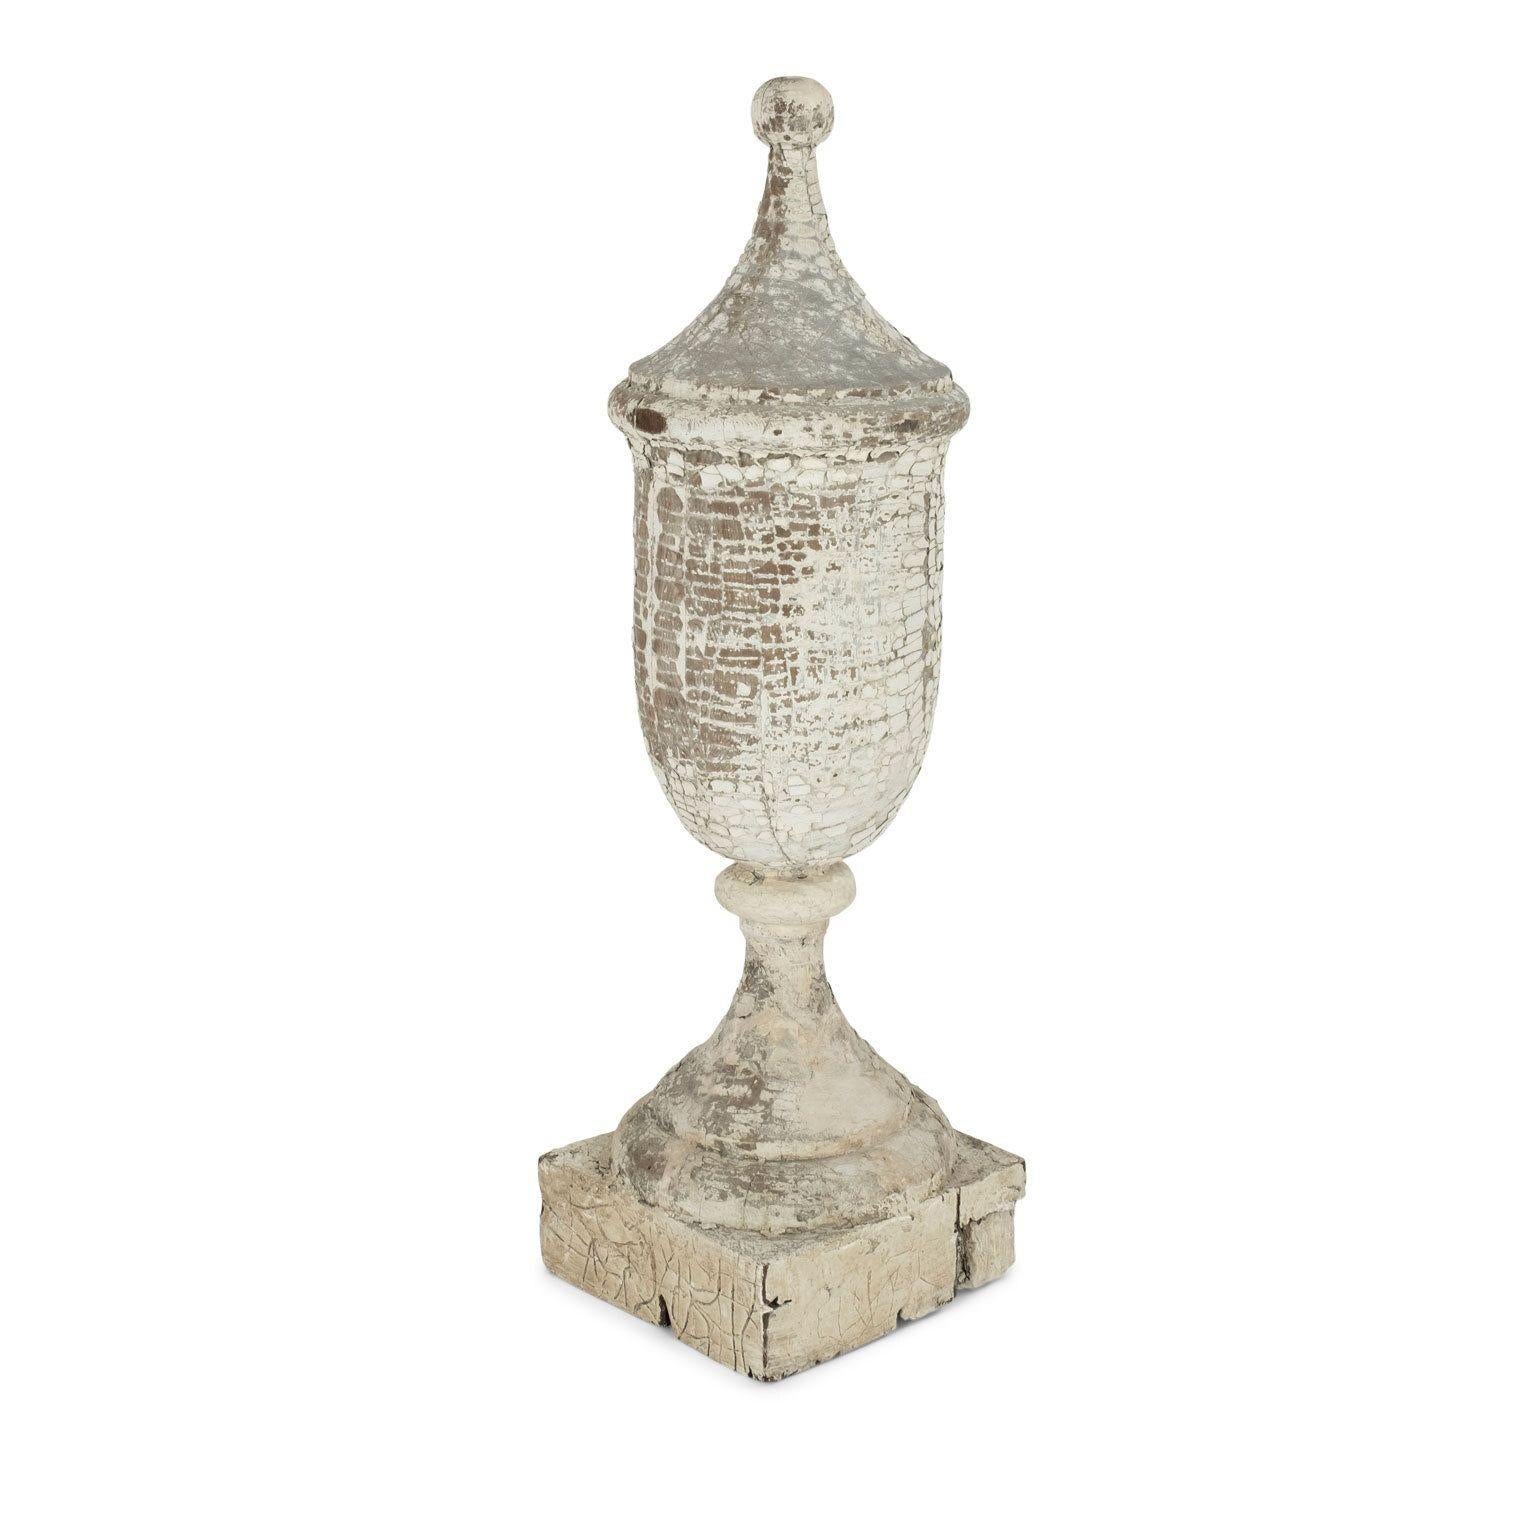 Enormous decorative architectural finial in early white paint, circa 1840-1880 (Look at last picture for idea of scale).

Note: Regional differences in humidity and climate during shipping may cause antique and vintage wood to shrink and/or split